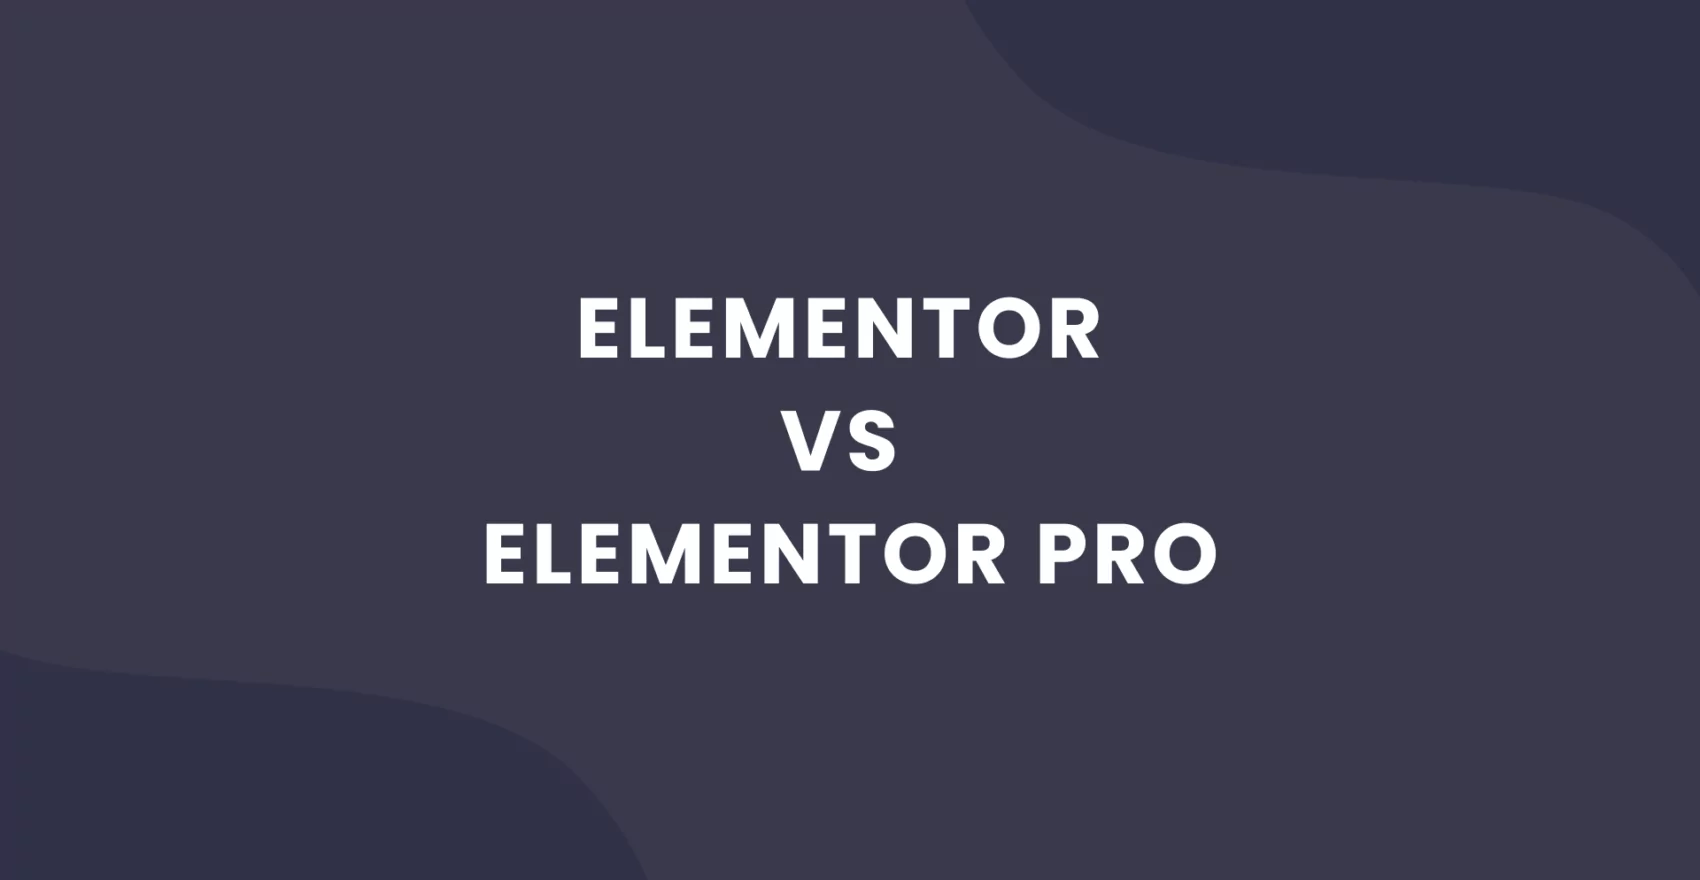 Elementor vs Elementor Pro: ProCoders Tips on Which to Choose for Your Project